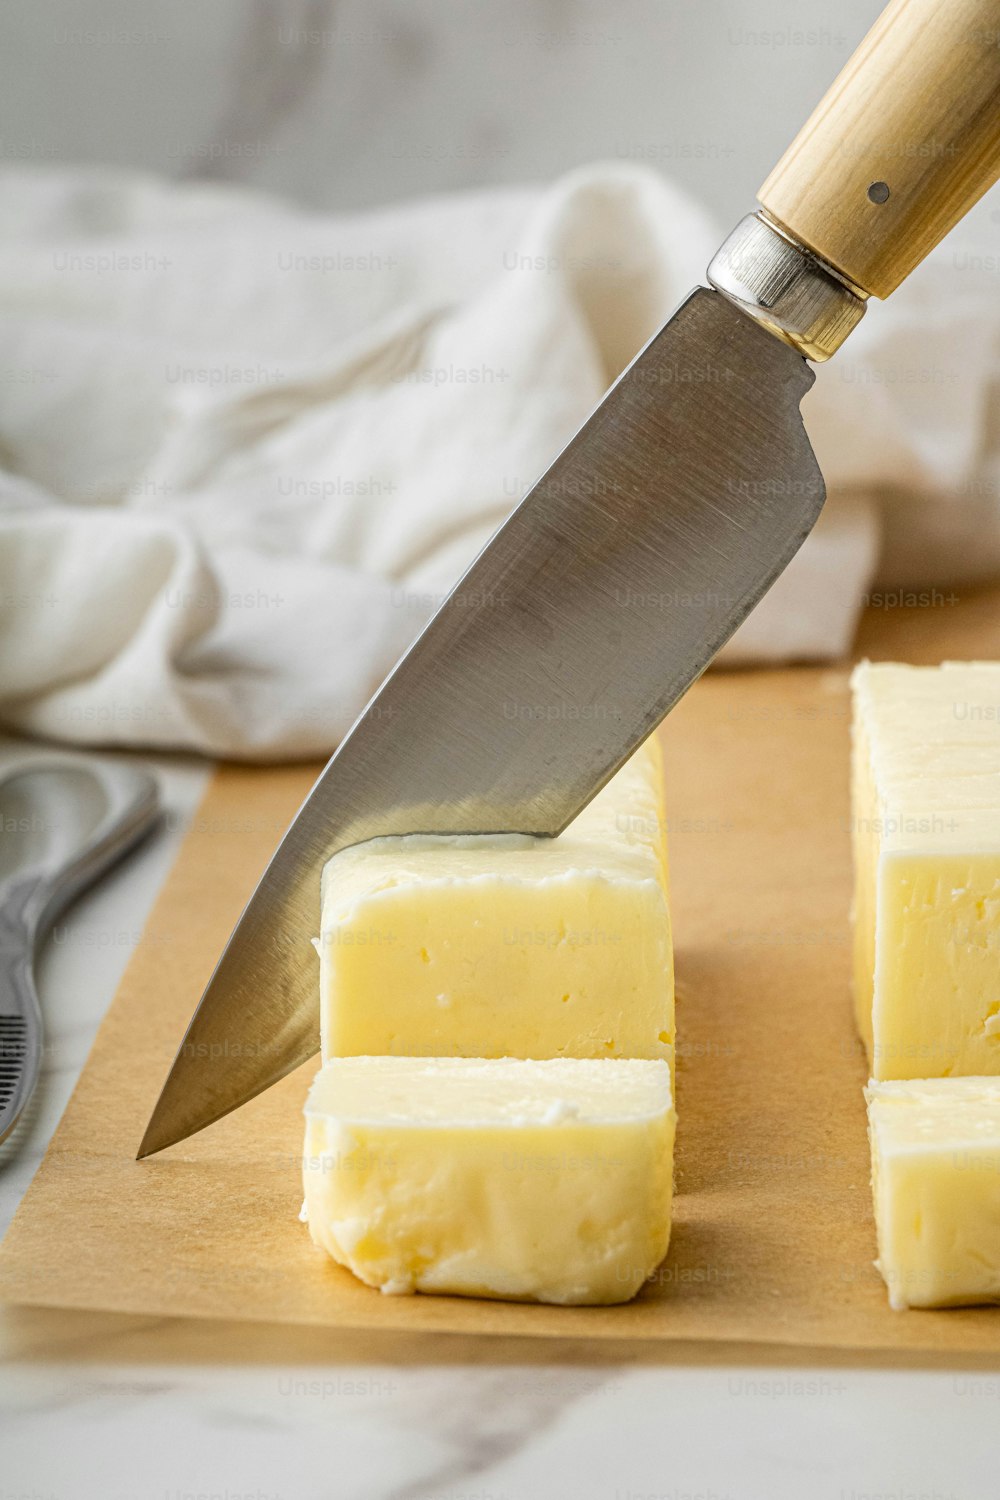 a knife cutting a block of cheese on a cutting board